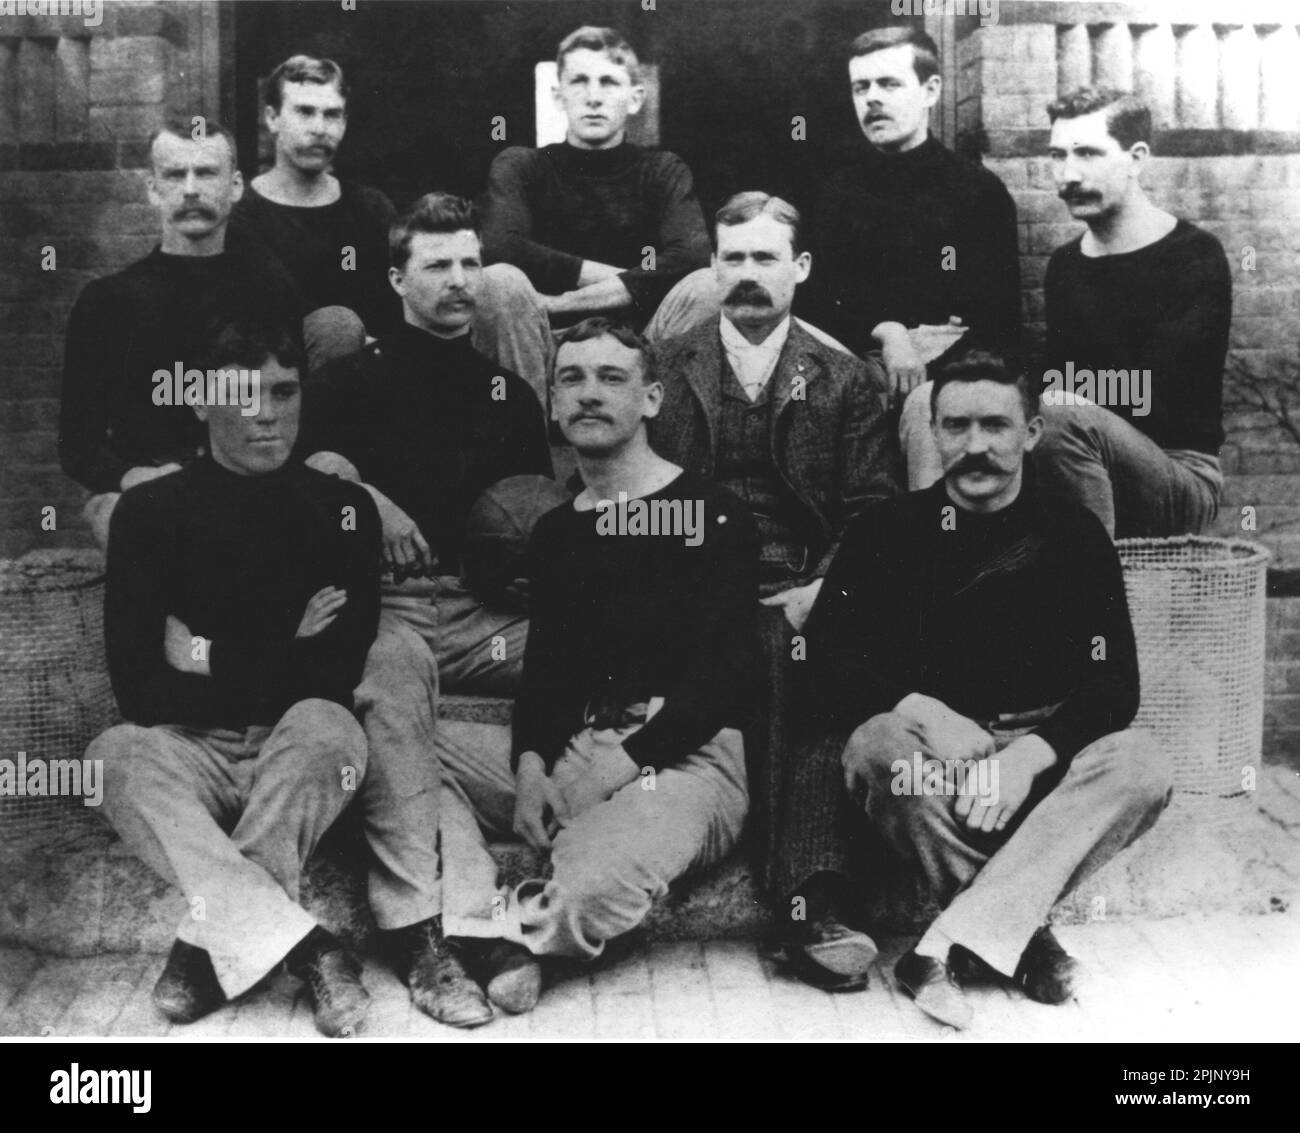 Dr. James Naismith (wearing suit), a Springfield College instructor and basketball’s inventor posed with the “First Team”. The first game was played in 1891 in fulfillment of an assignment given to Naismith to create a game that could be played indoors between the football and baseball seasons, Springfield, MA, 12/1891.. (NARA/Springfield College) Stock Photo